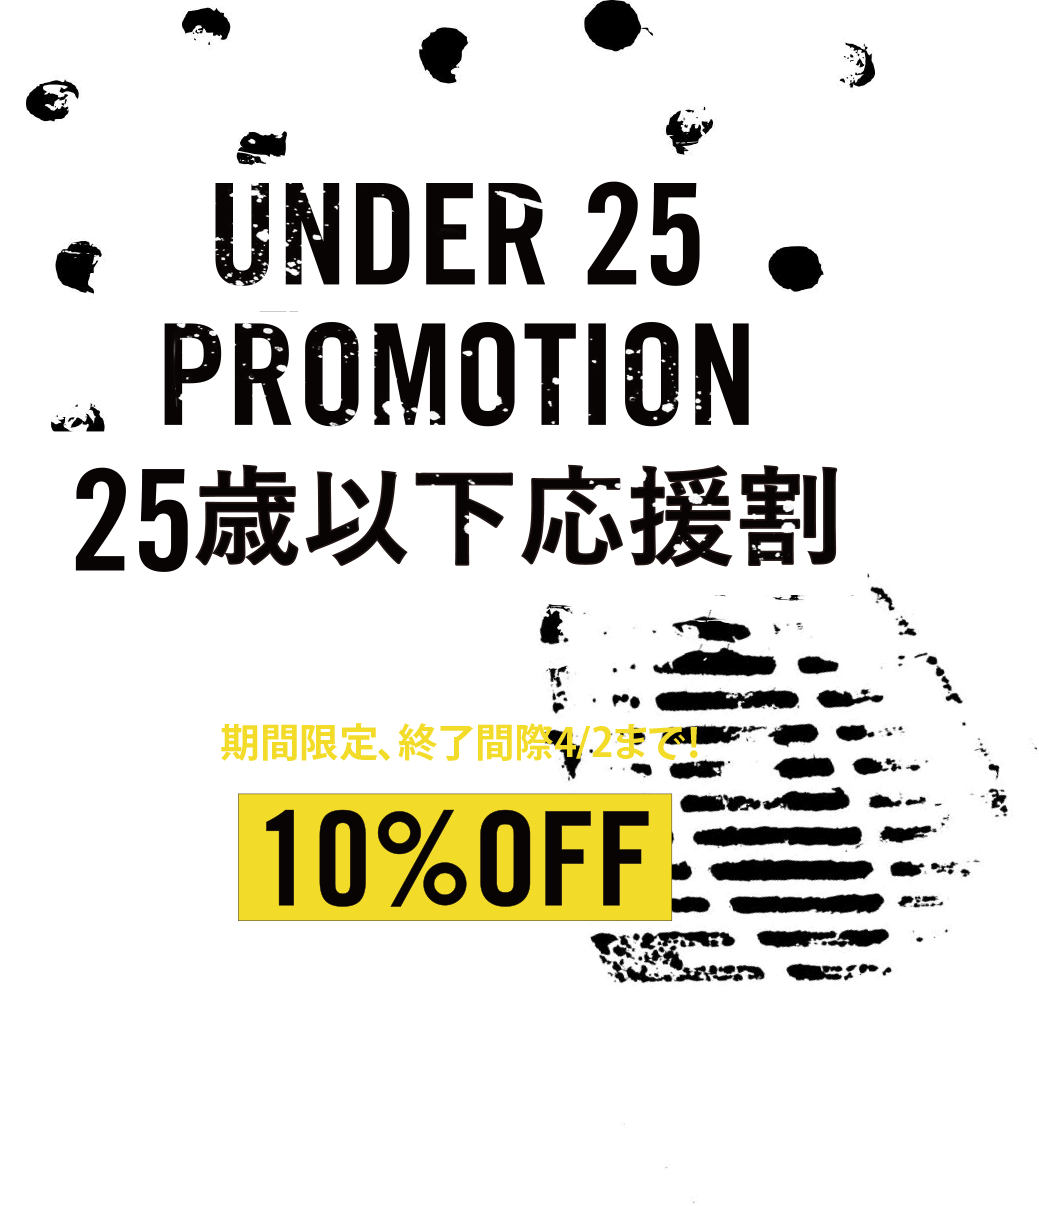 UNDER 25 PROMOTION 期間限定 10%OFF